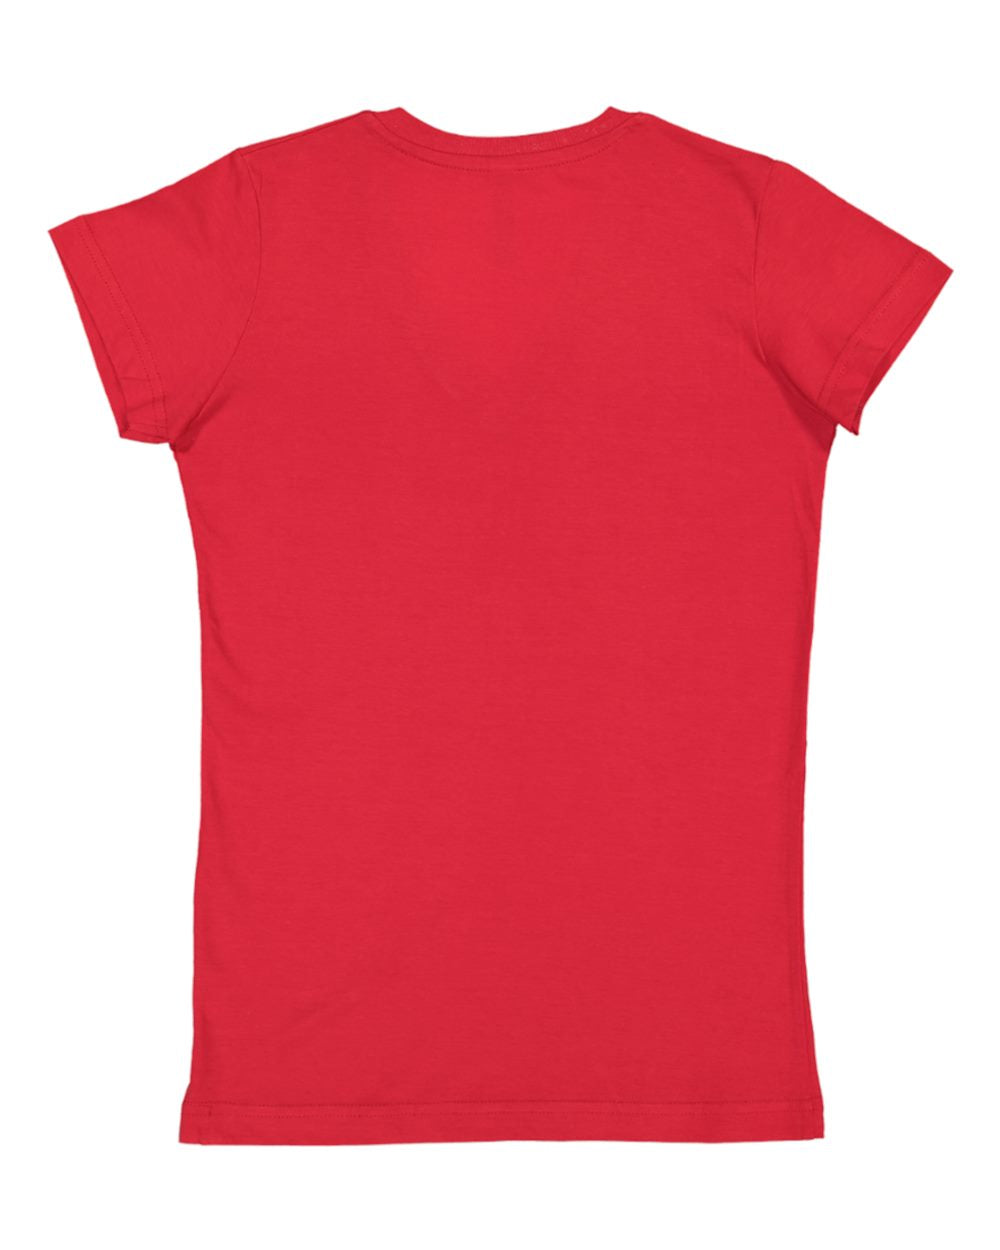 Ladies (Junior) Fitted --  (V-Neck) T-Shirt -- 100% Cotton -- Red Color